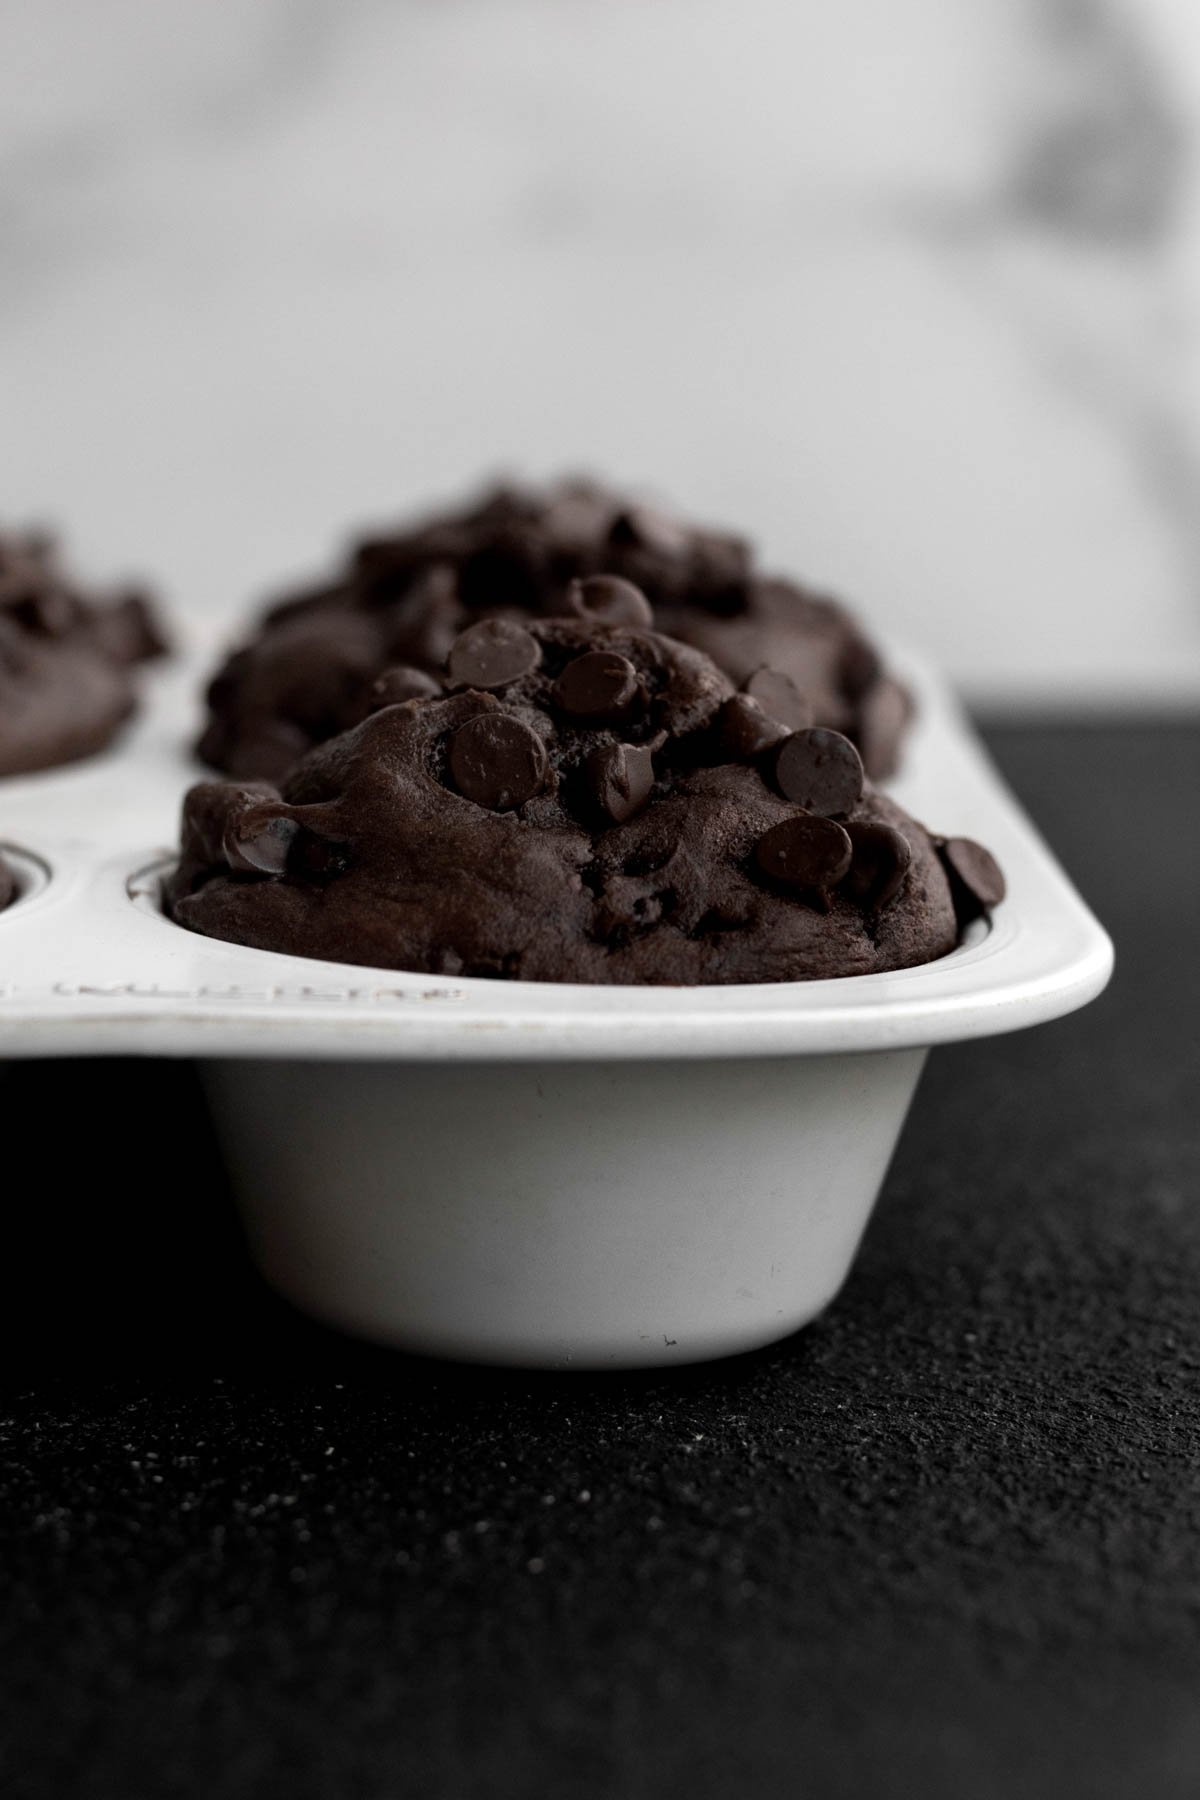 Chocolate muffins in a muffin tray.